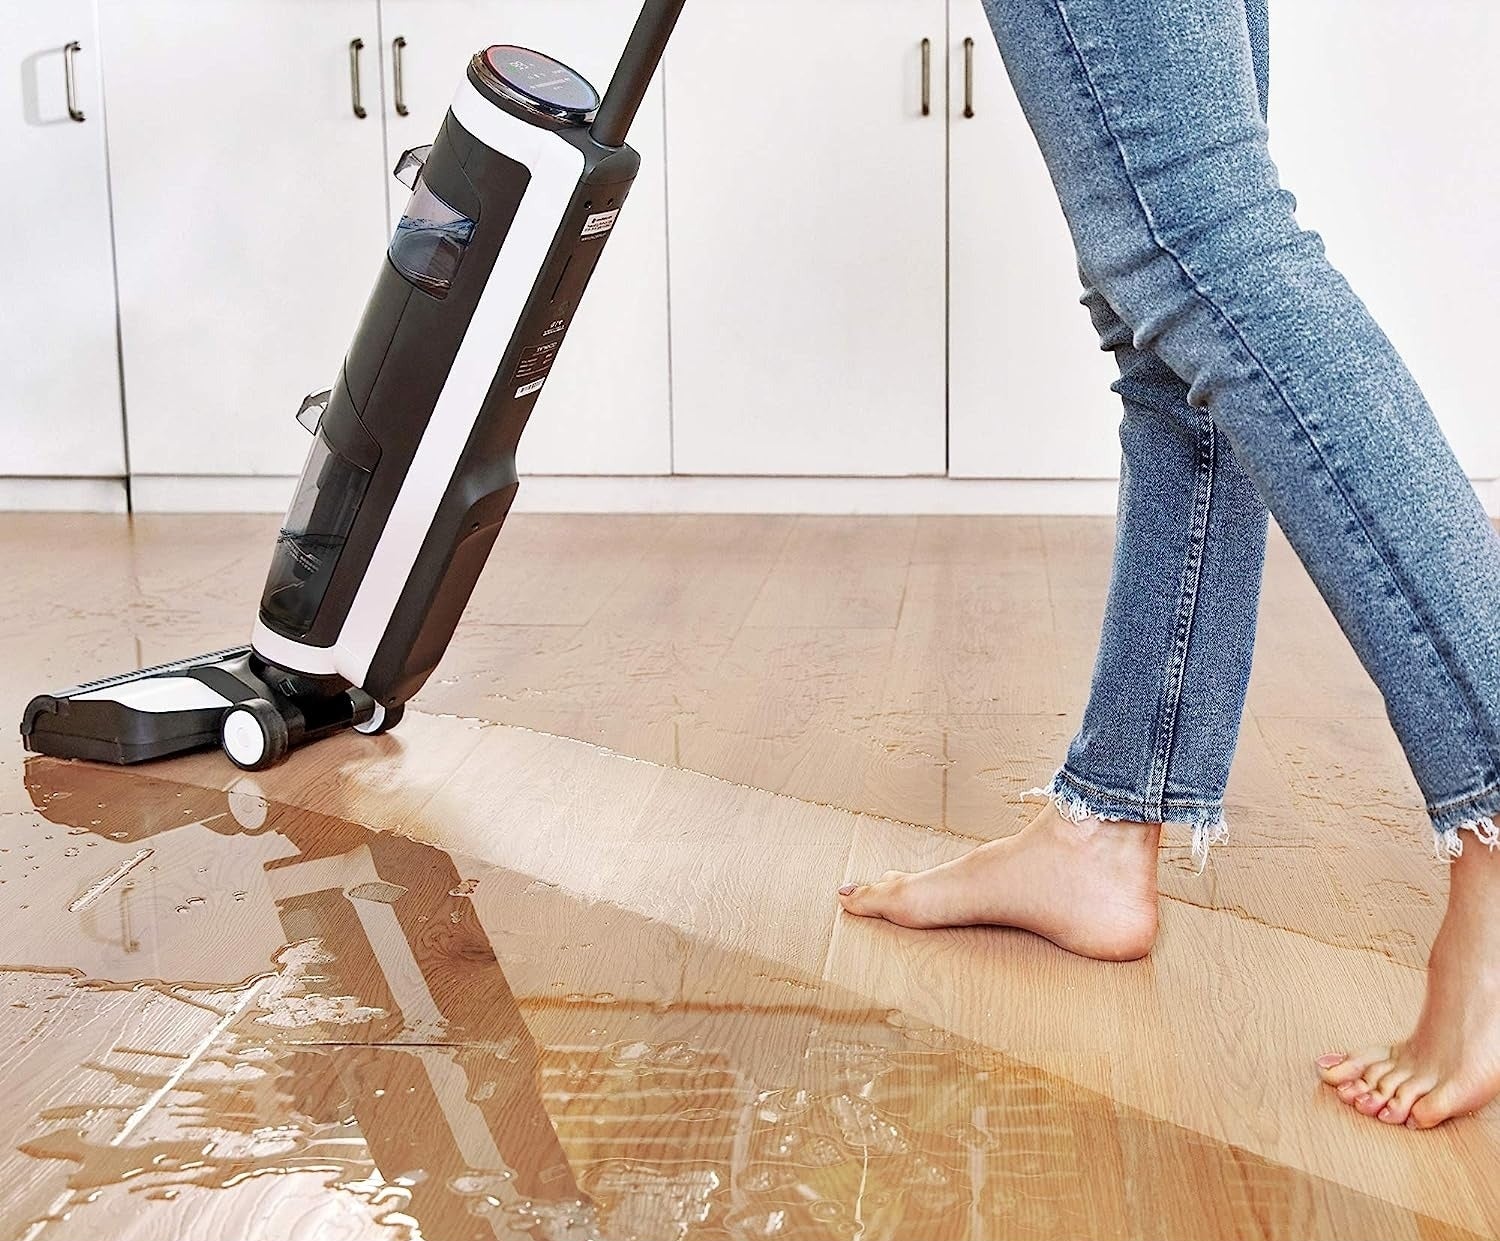 A model using the floor cleaner to mop up water on a hardwood floor